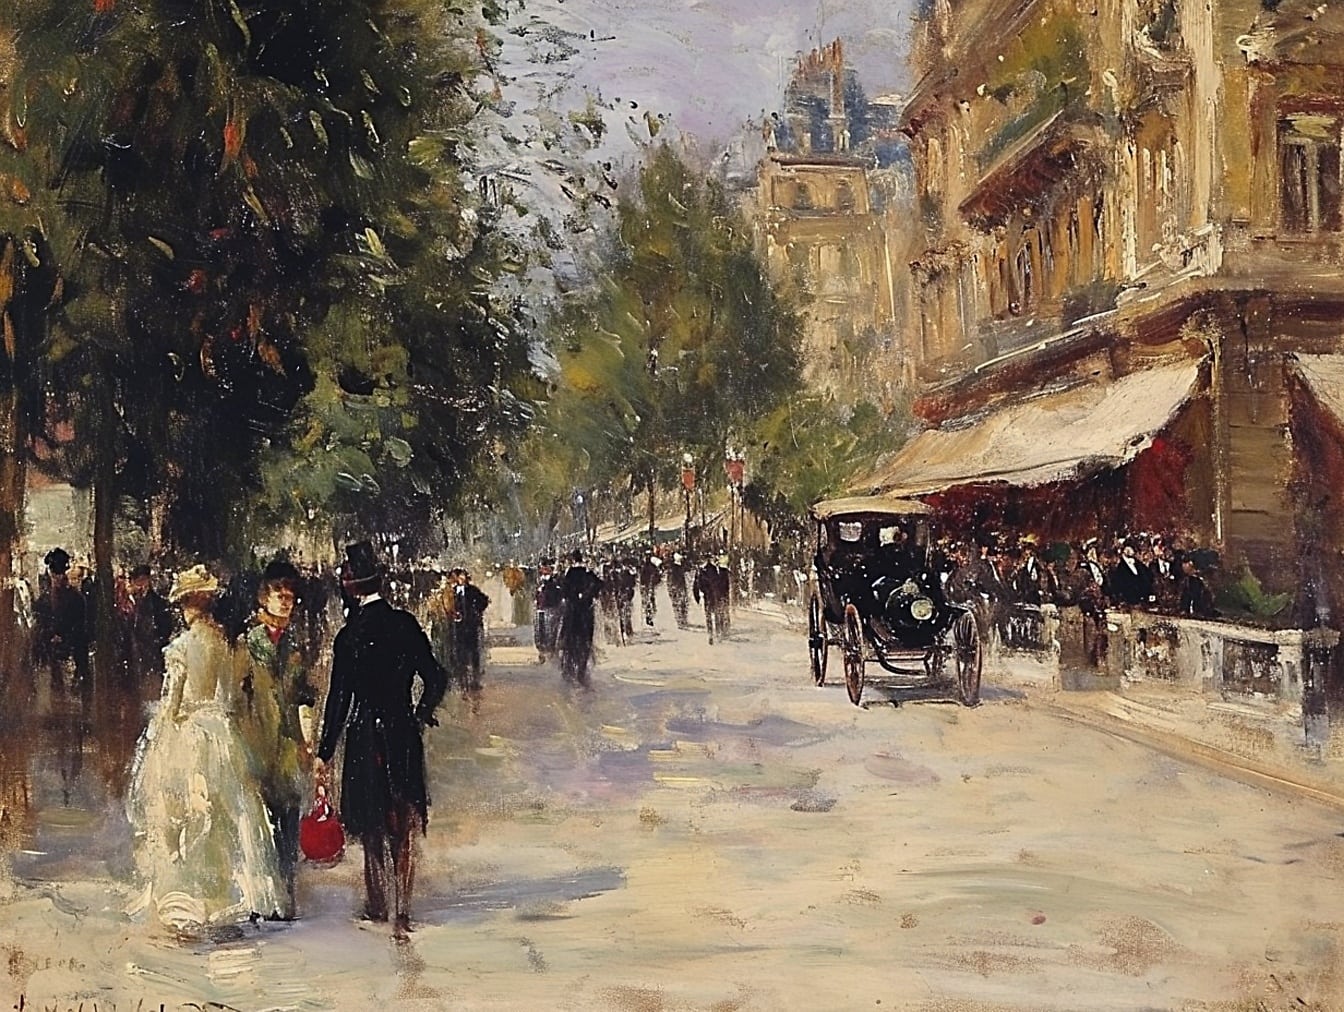 Oil painting of people walking on a street in downtown depicting 19th century lifestyle